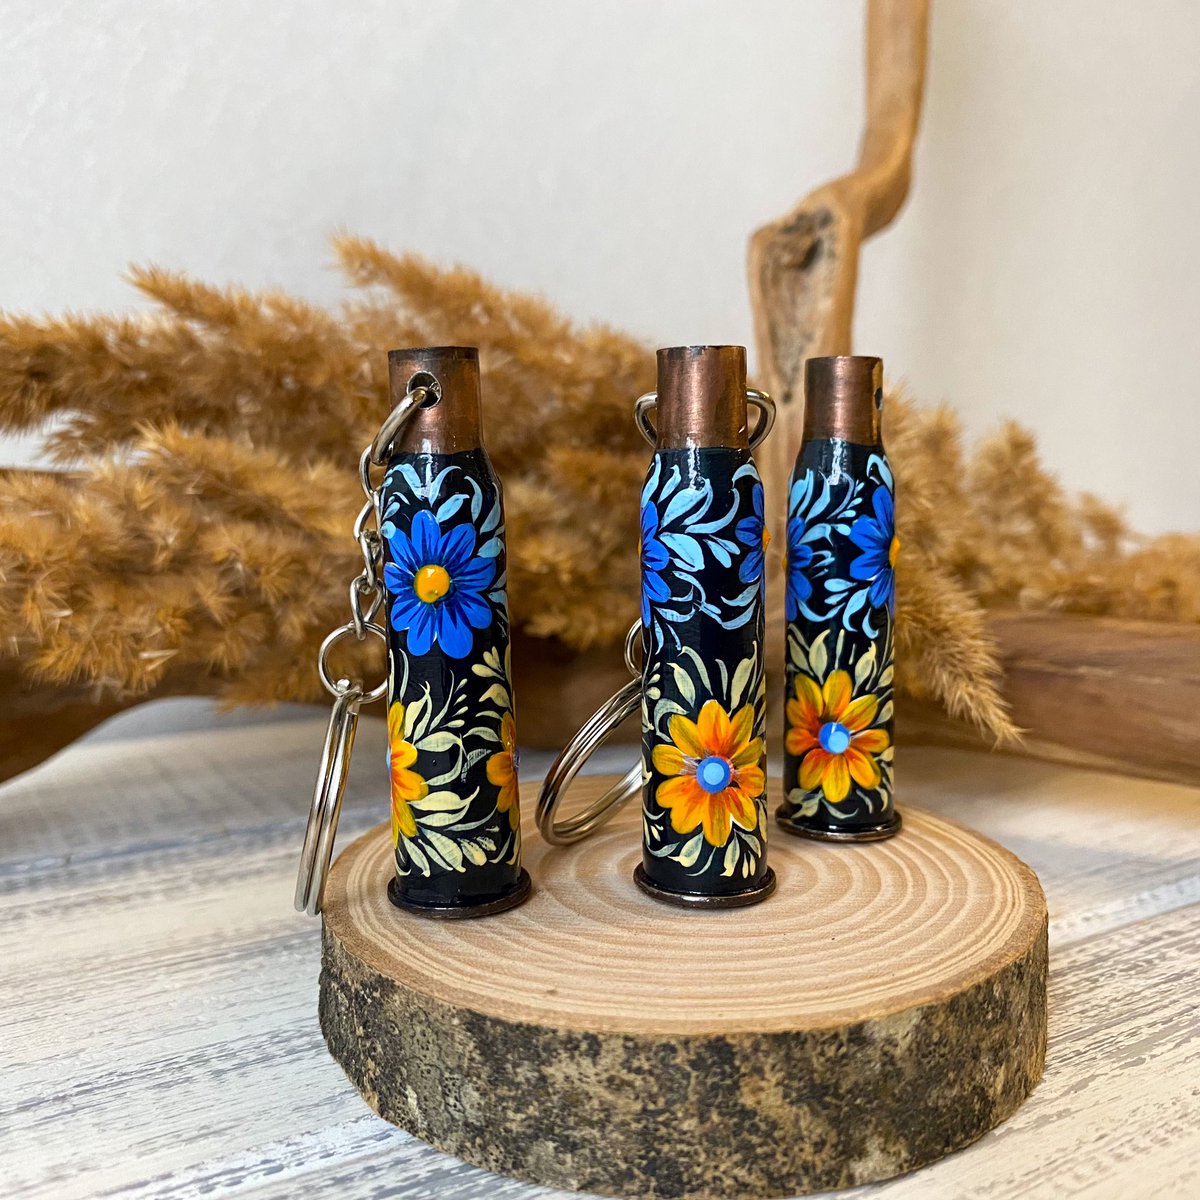 💥 You can win hand painted shell casings from Bakhmut! They are painted in the Petrykivka style. Read more about it here: authenticukraine.com.ua/en/blog/petrik…